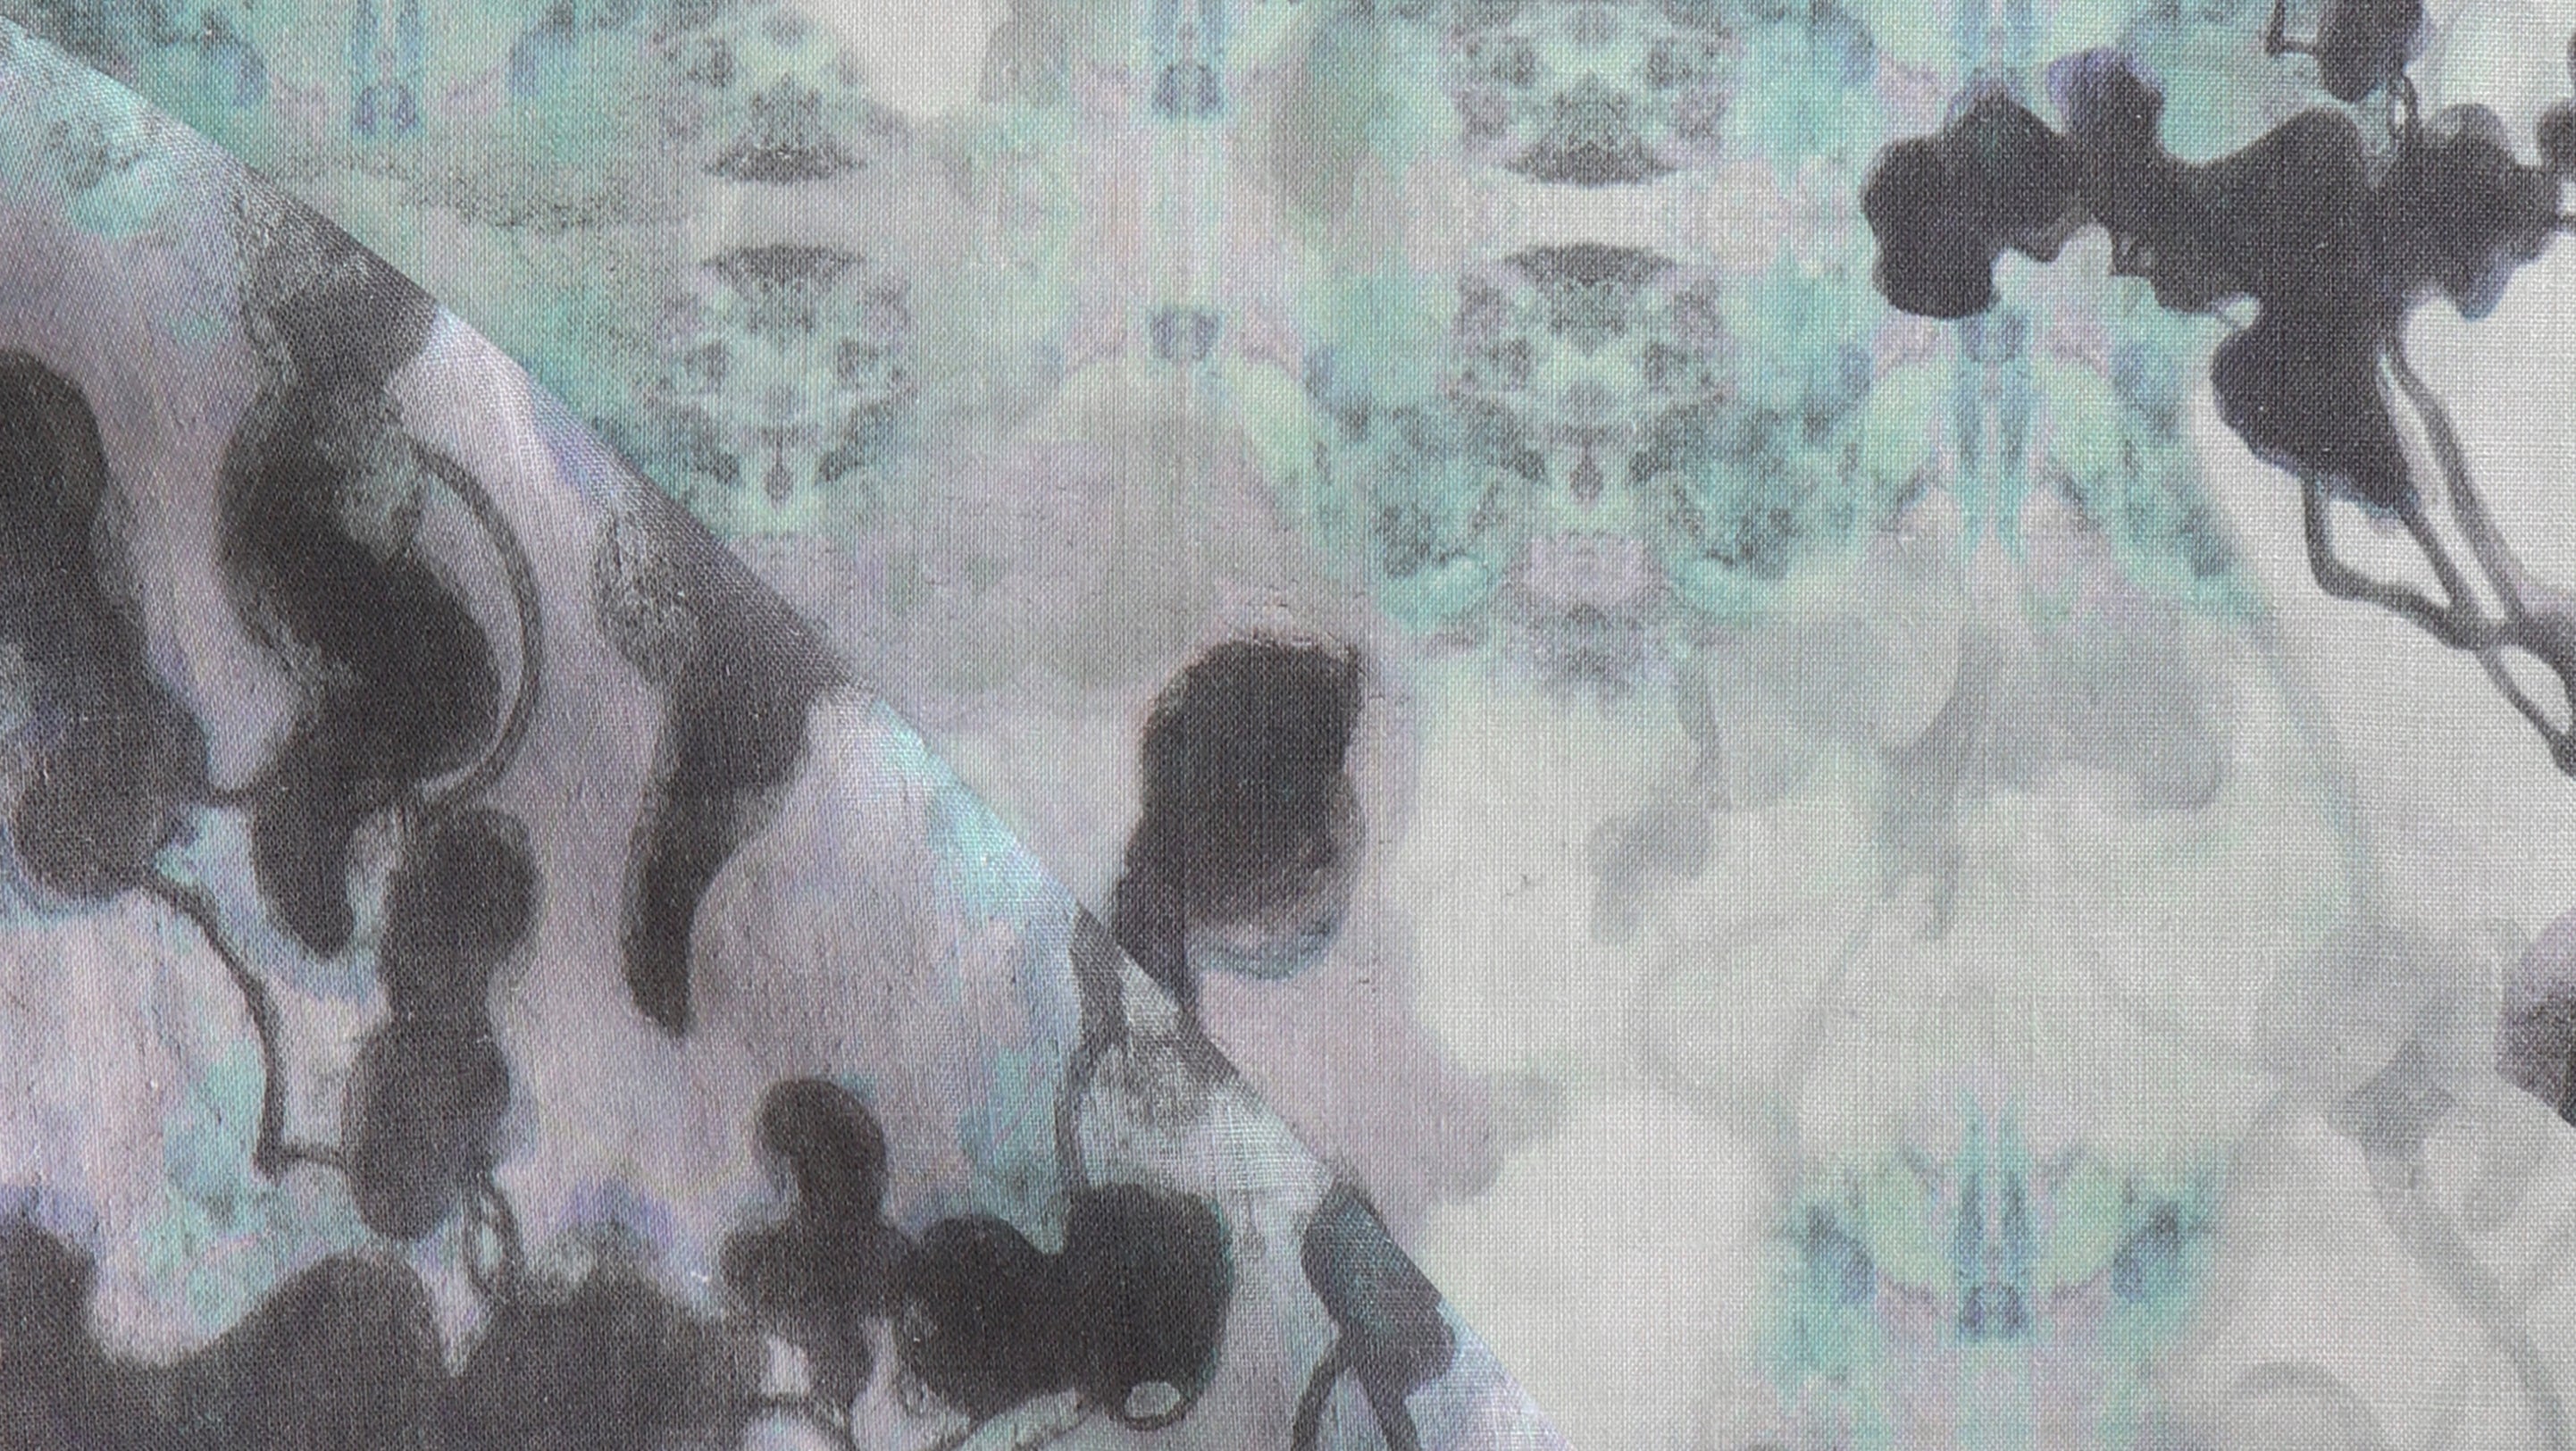 A close up of an abstract painting on a fabric